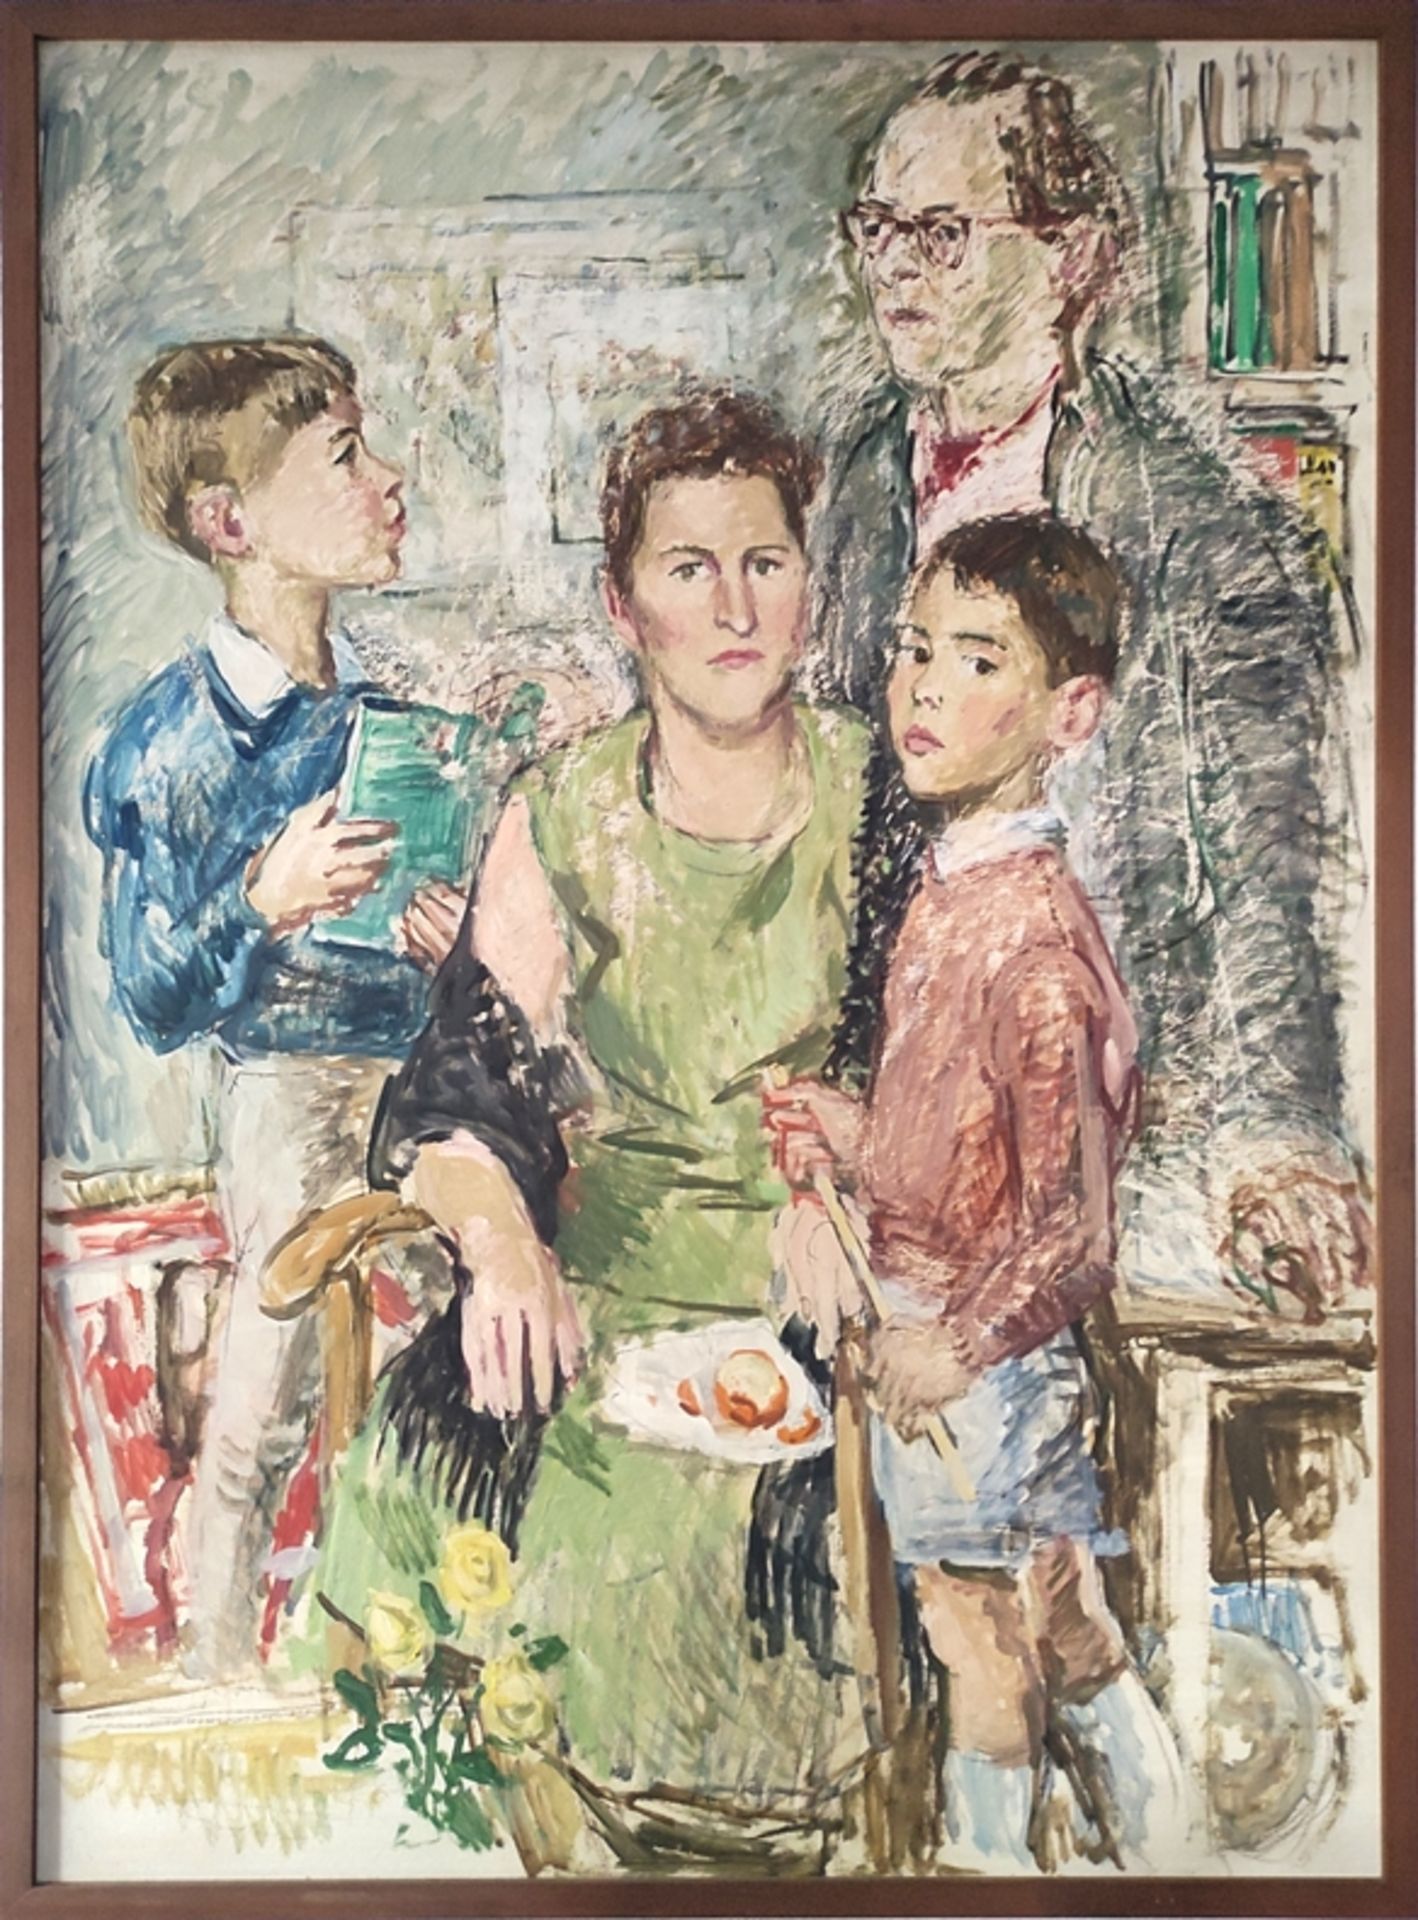 Herburger, Julius (1900-1973 Ravensburg) "Portrait of the Rauch family from Ravensburg", sketchy an